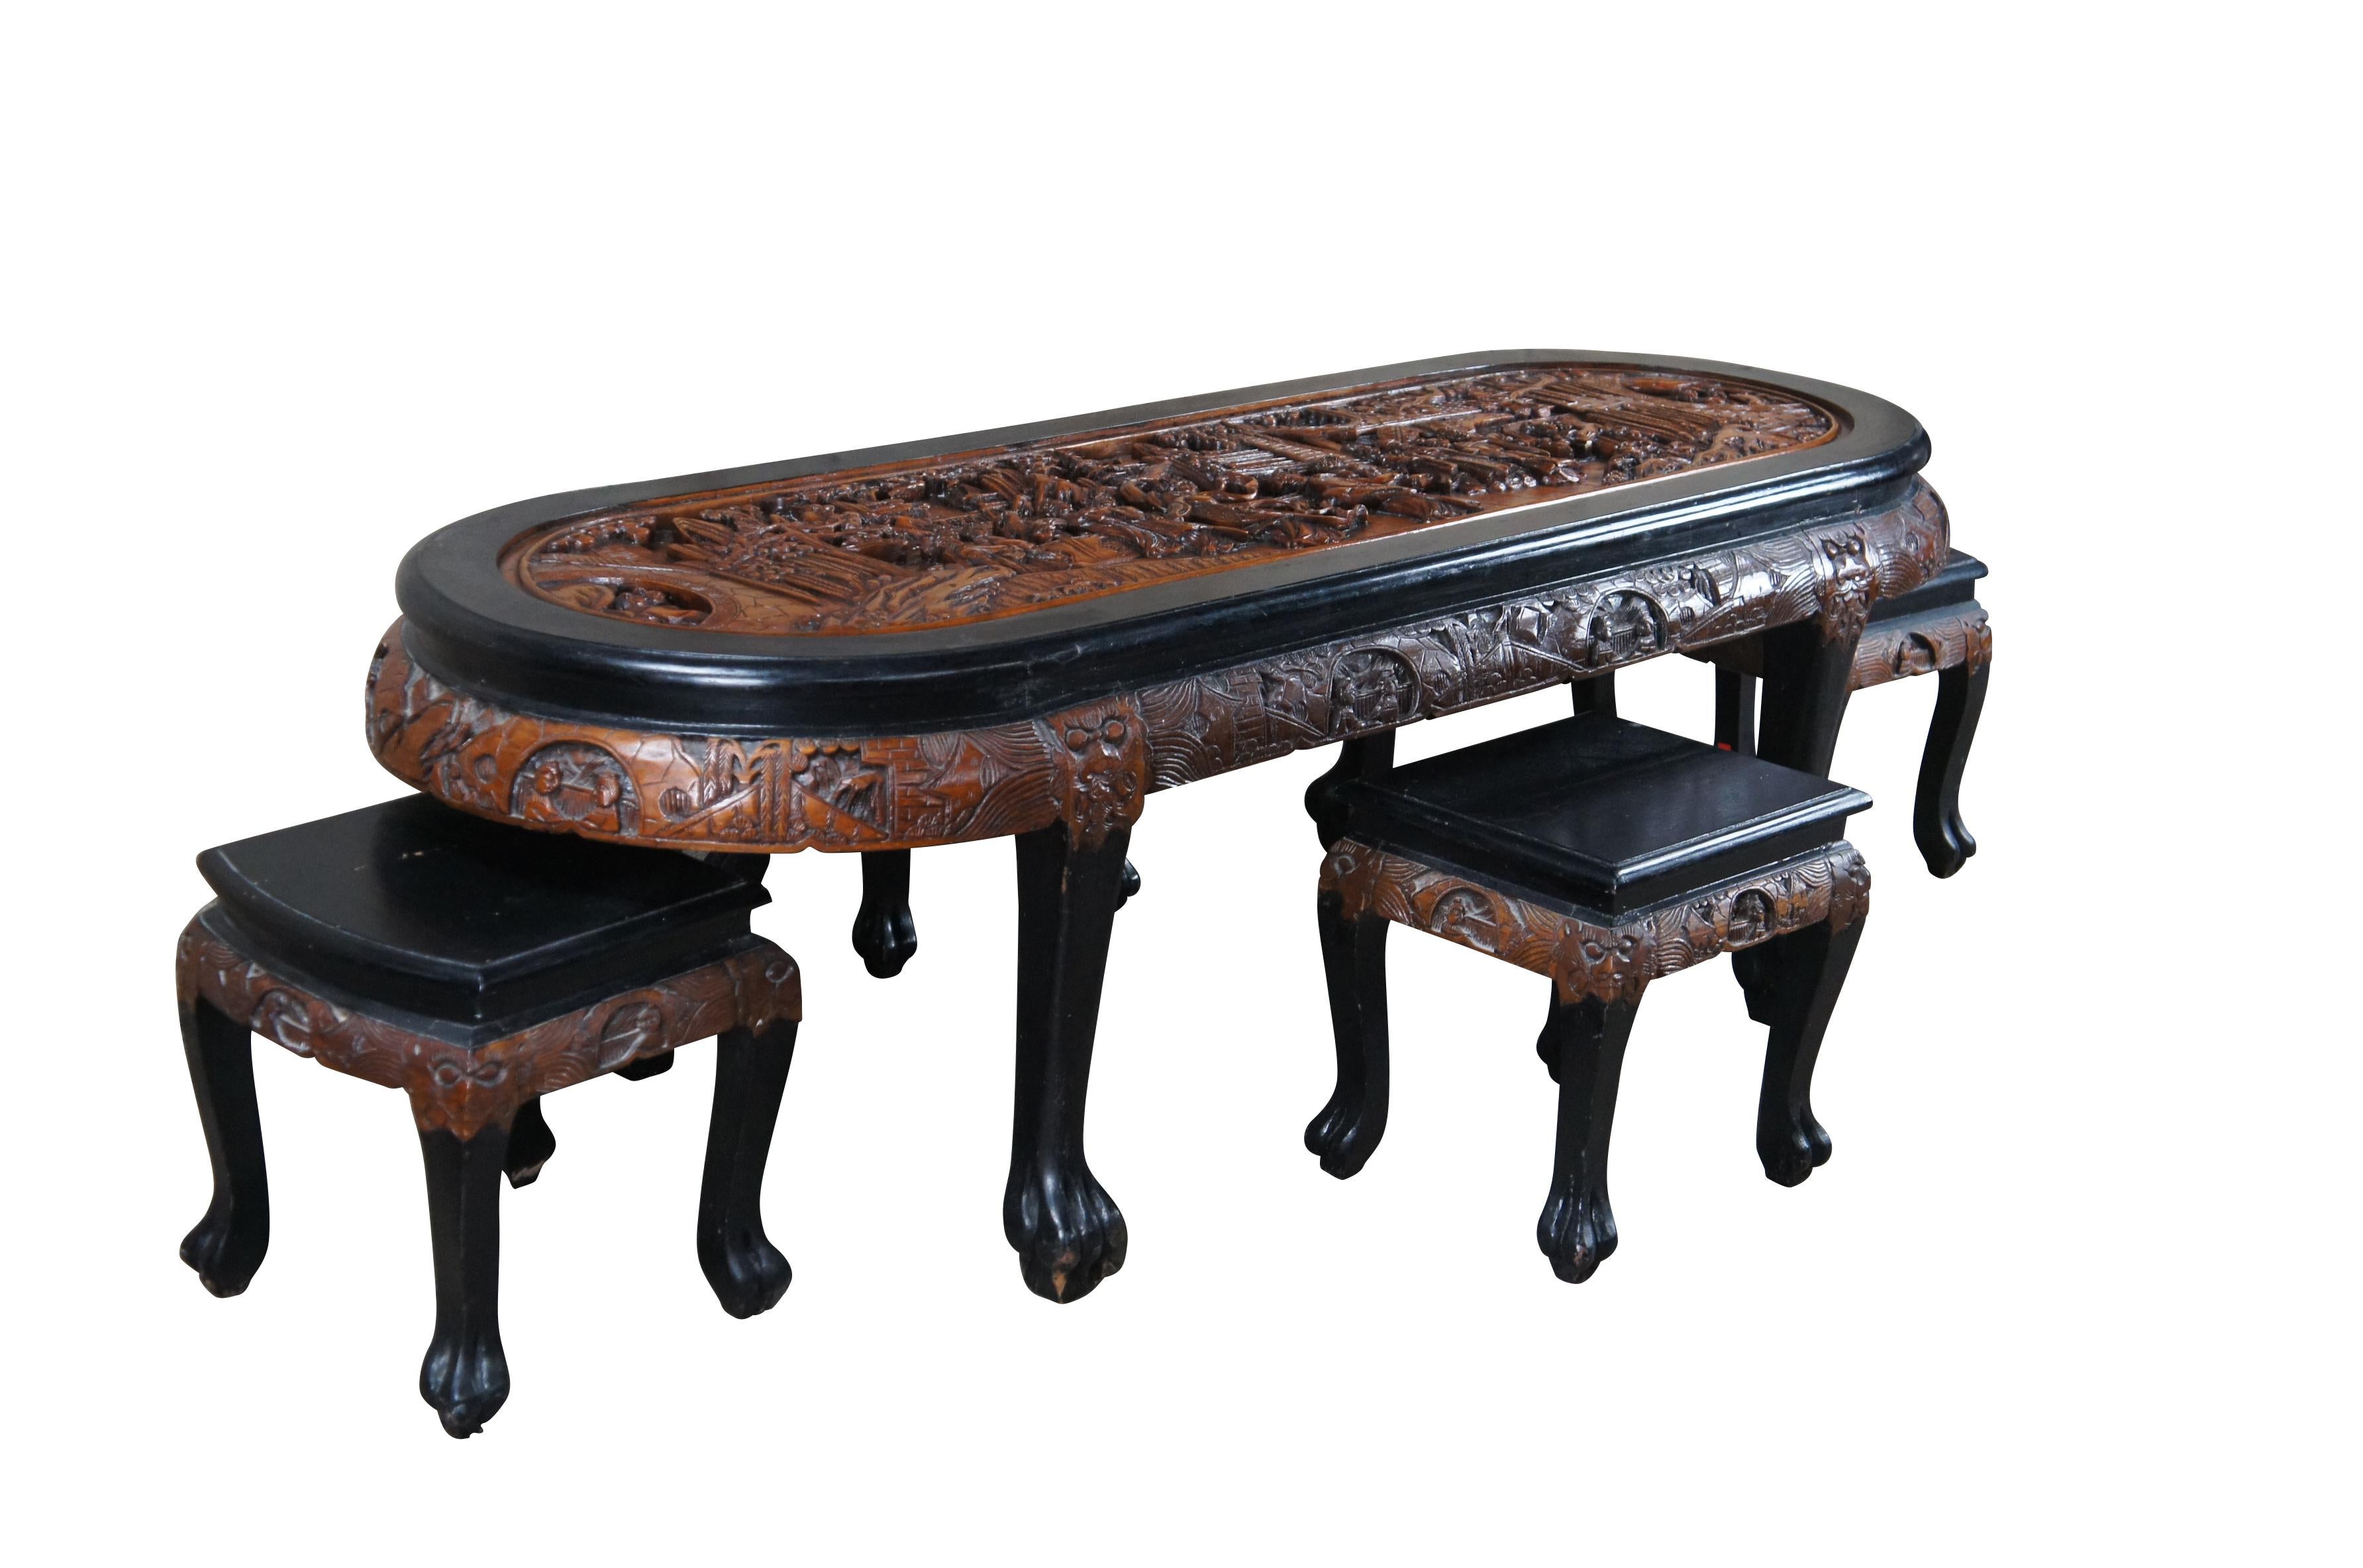 Vintage Chinese Chinoiserie oval coffee / cocktail / dining / tea table and four nesting stools.  Made of elm and black lacquer featuring a carved landscape scene with Emperor, dancing Geishas, pagodas, Cherry Blossom trees, dragon faces and claw /